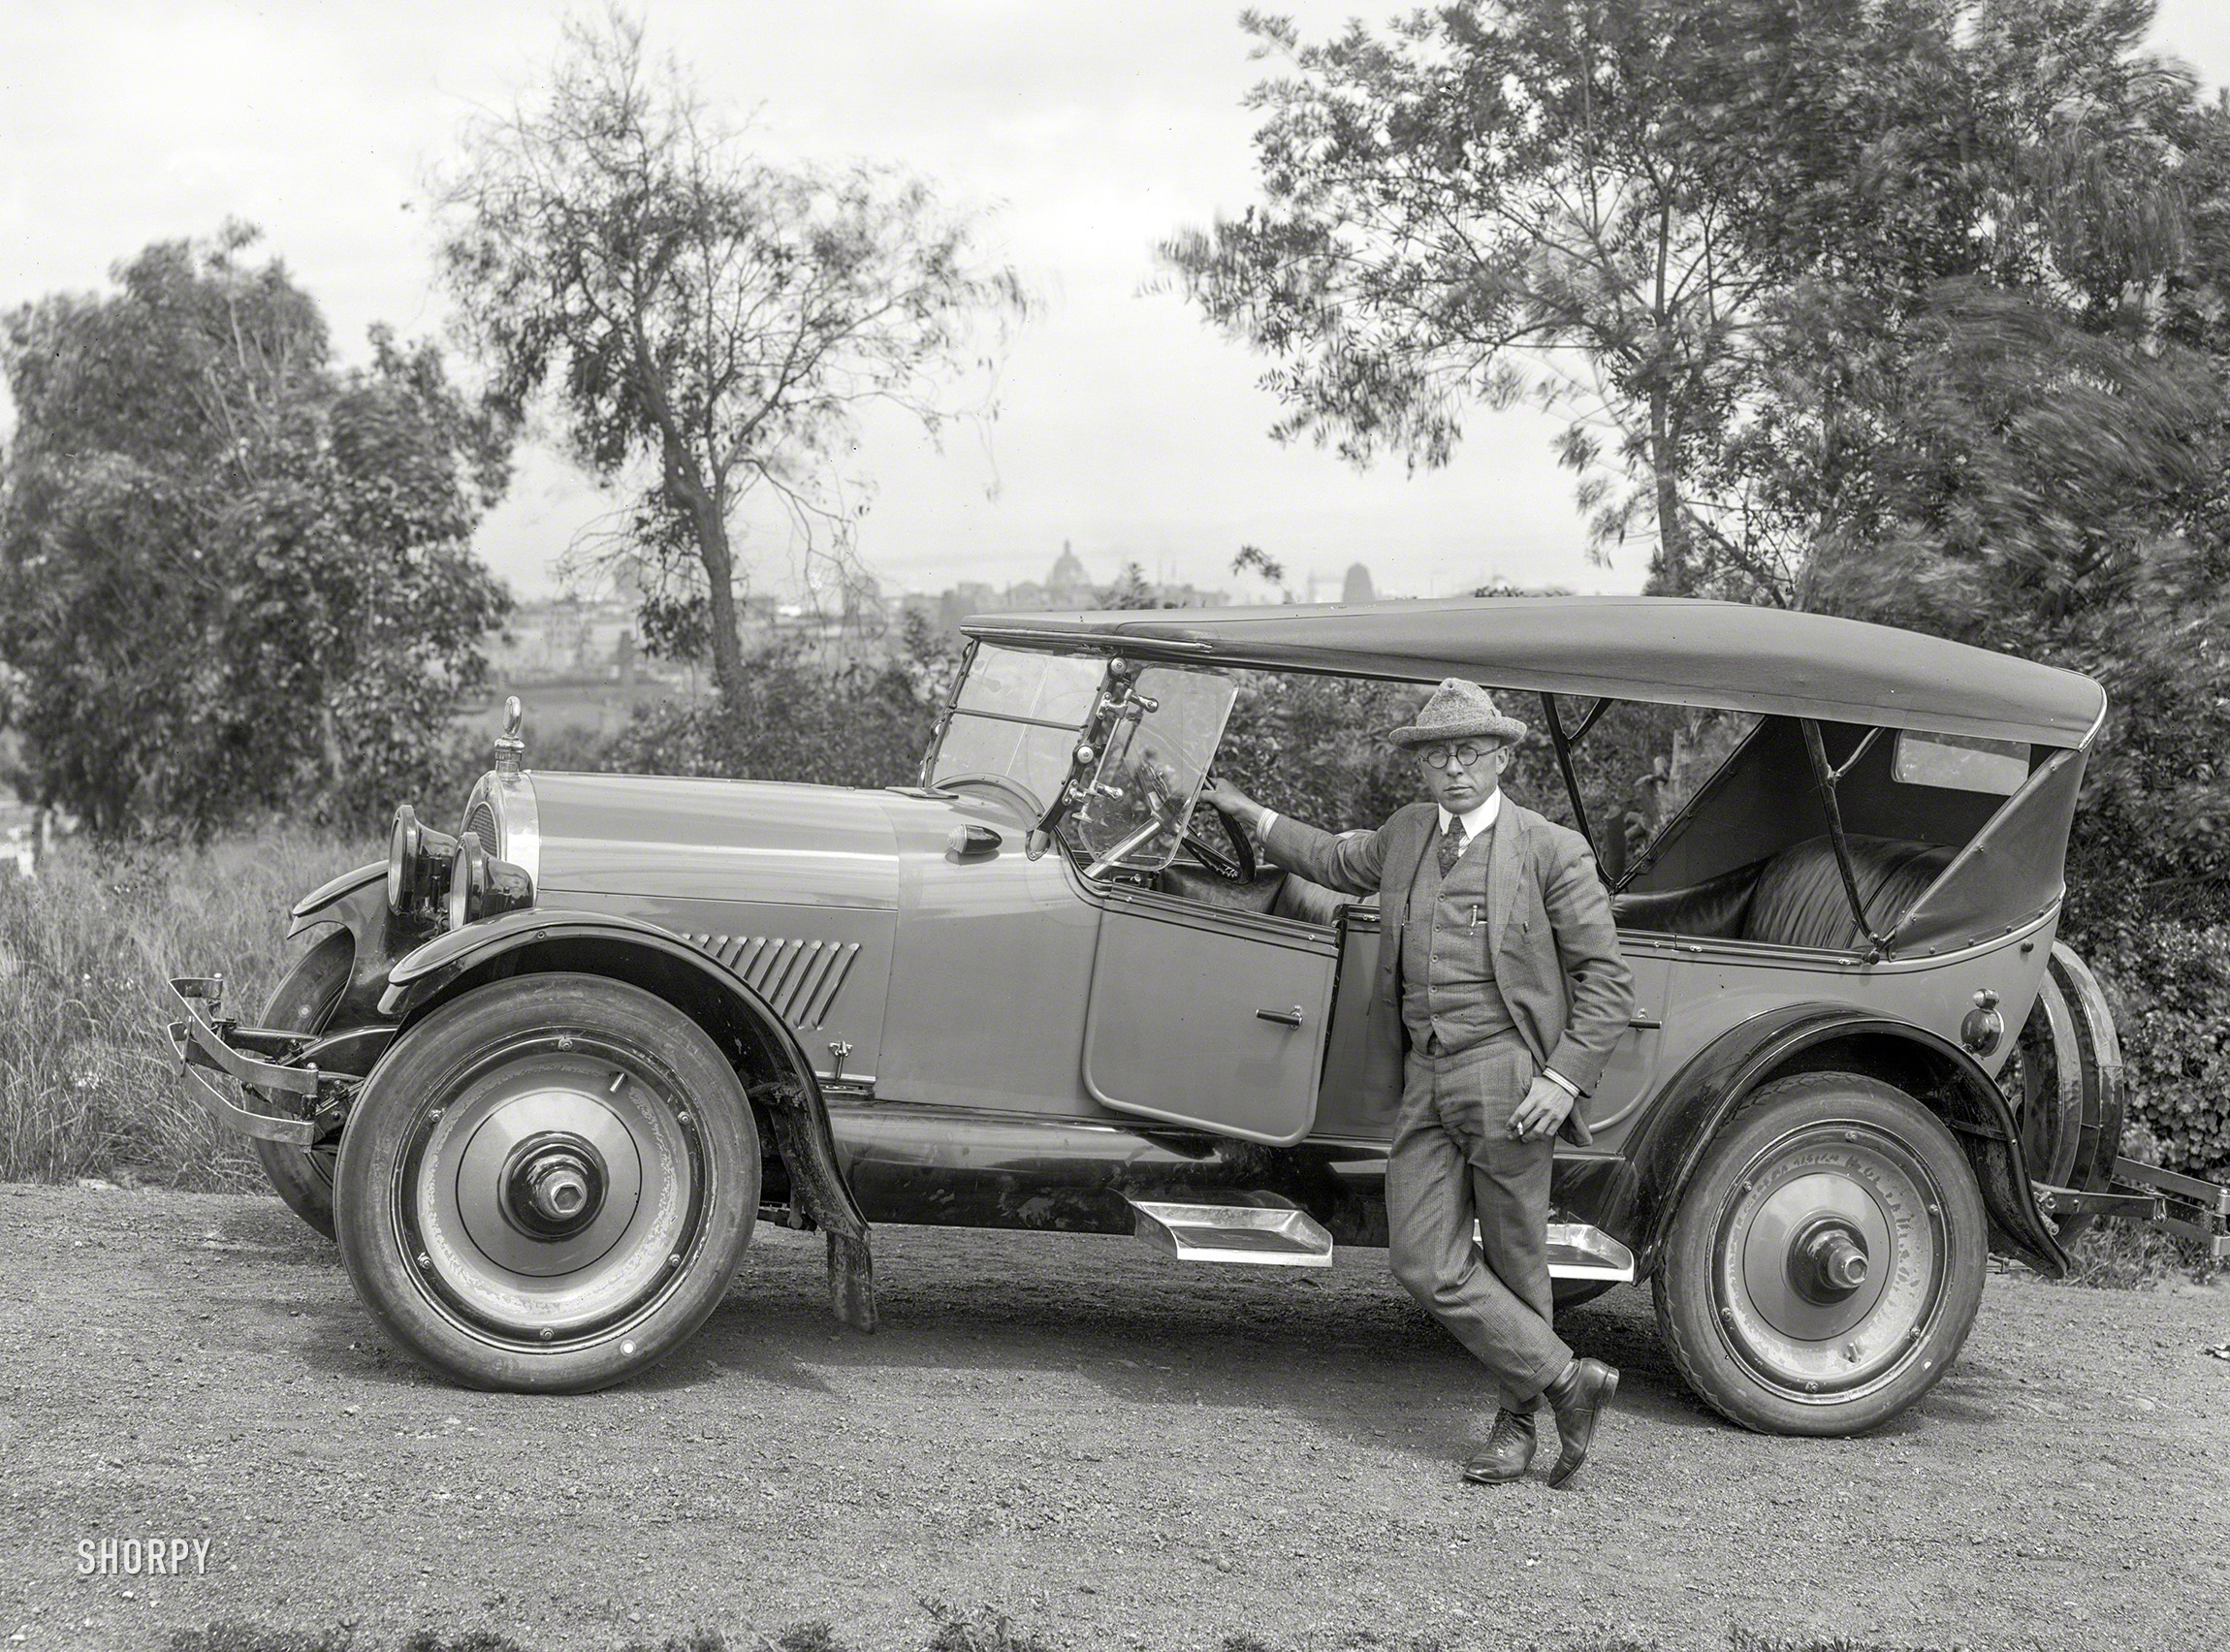 San Francisco circa 1924. "Oldsmobile touring sedan." Latest entry on the Shorpy Roster of Defunct Dreadnoughts. Glass negative by Chris Helin. View full size.